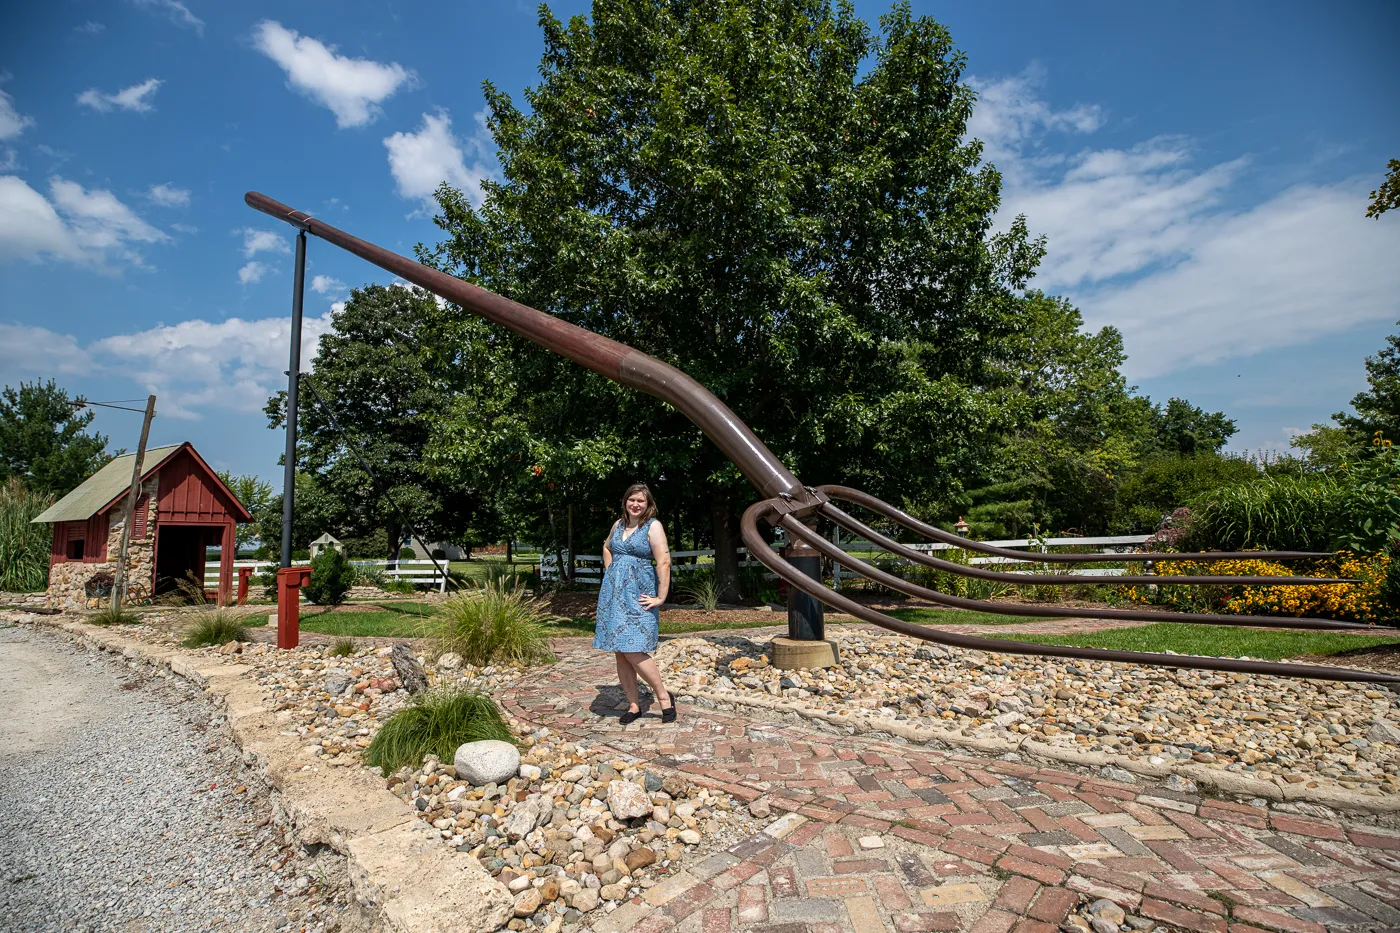 The world's largest pitchfork in Casey, Illinois Roadside Attraction